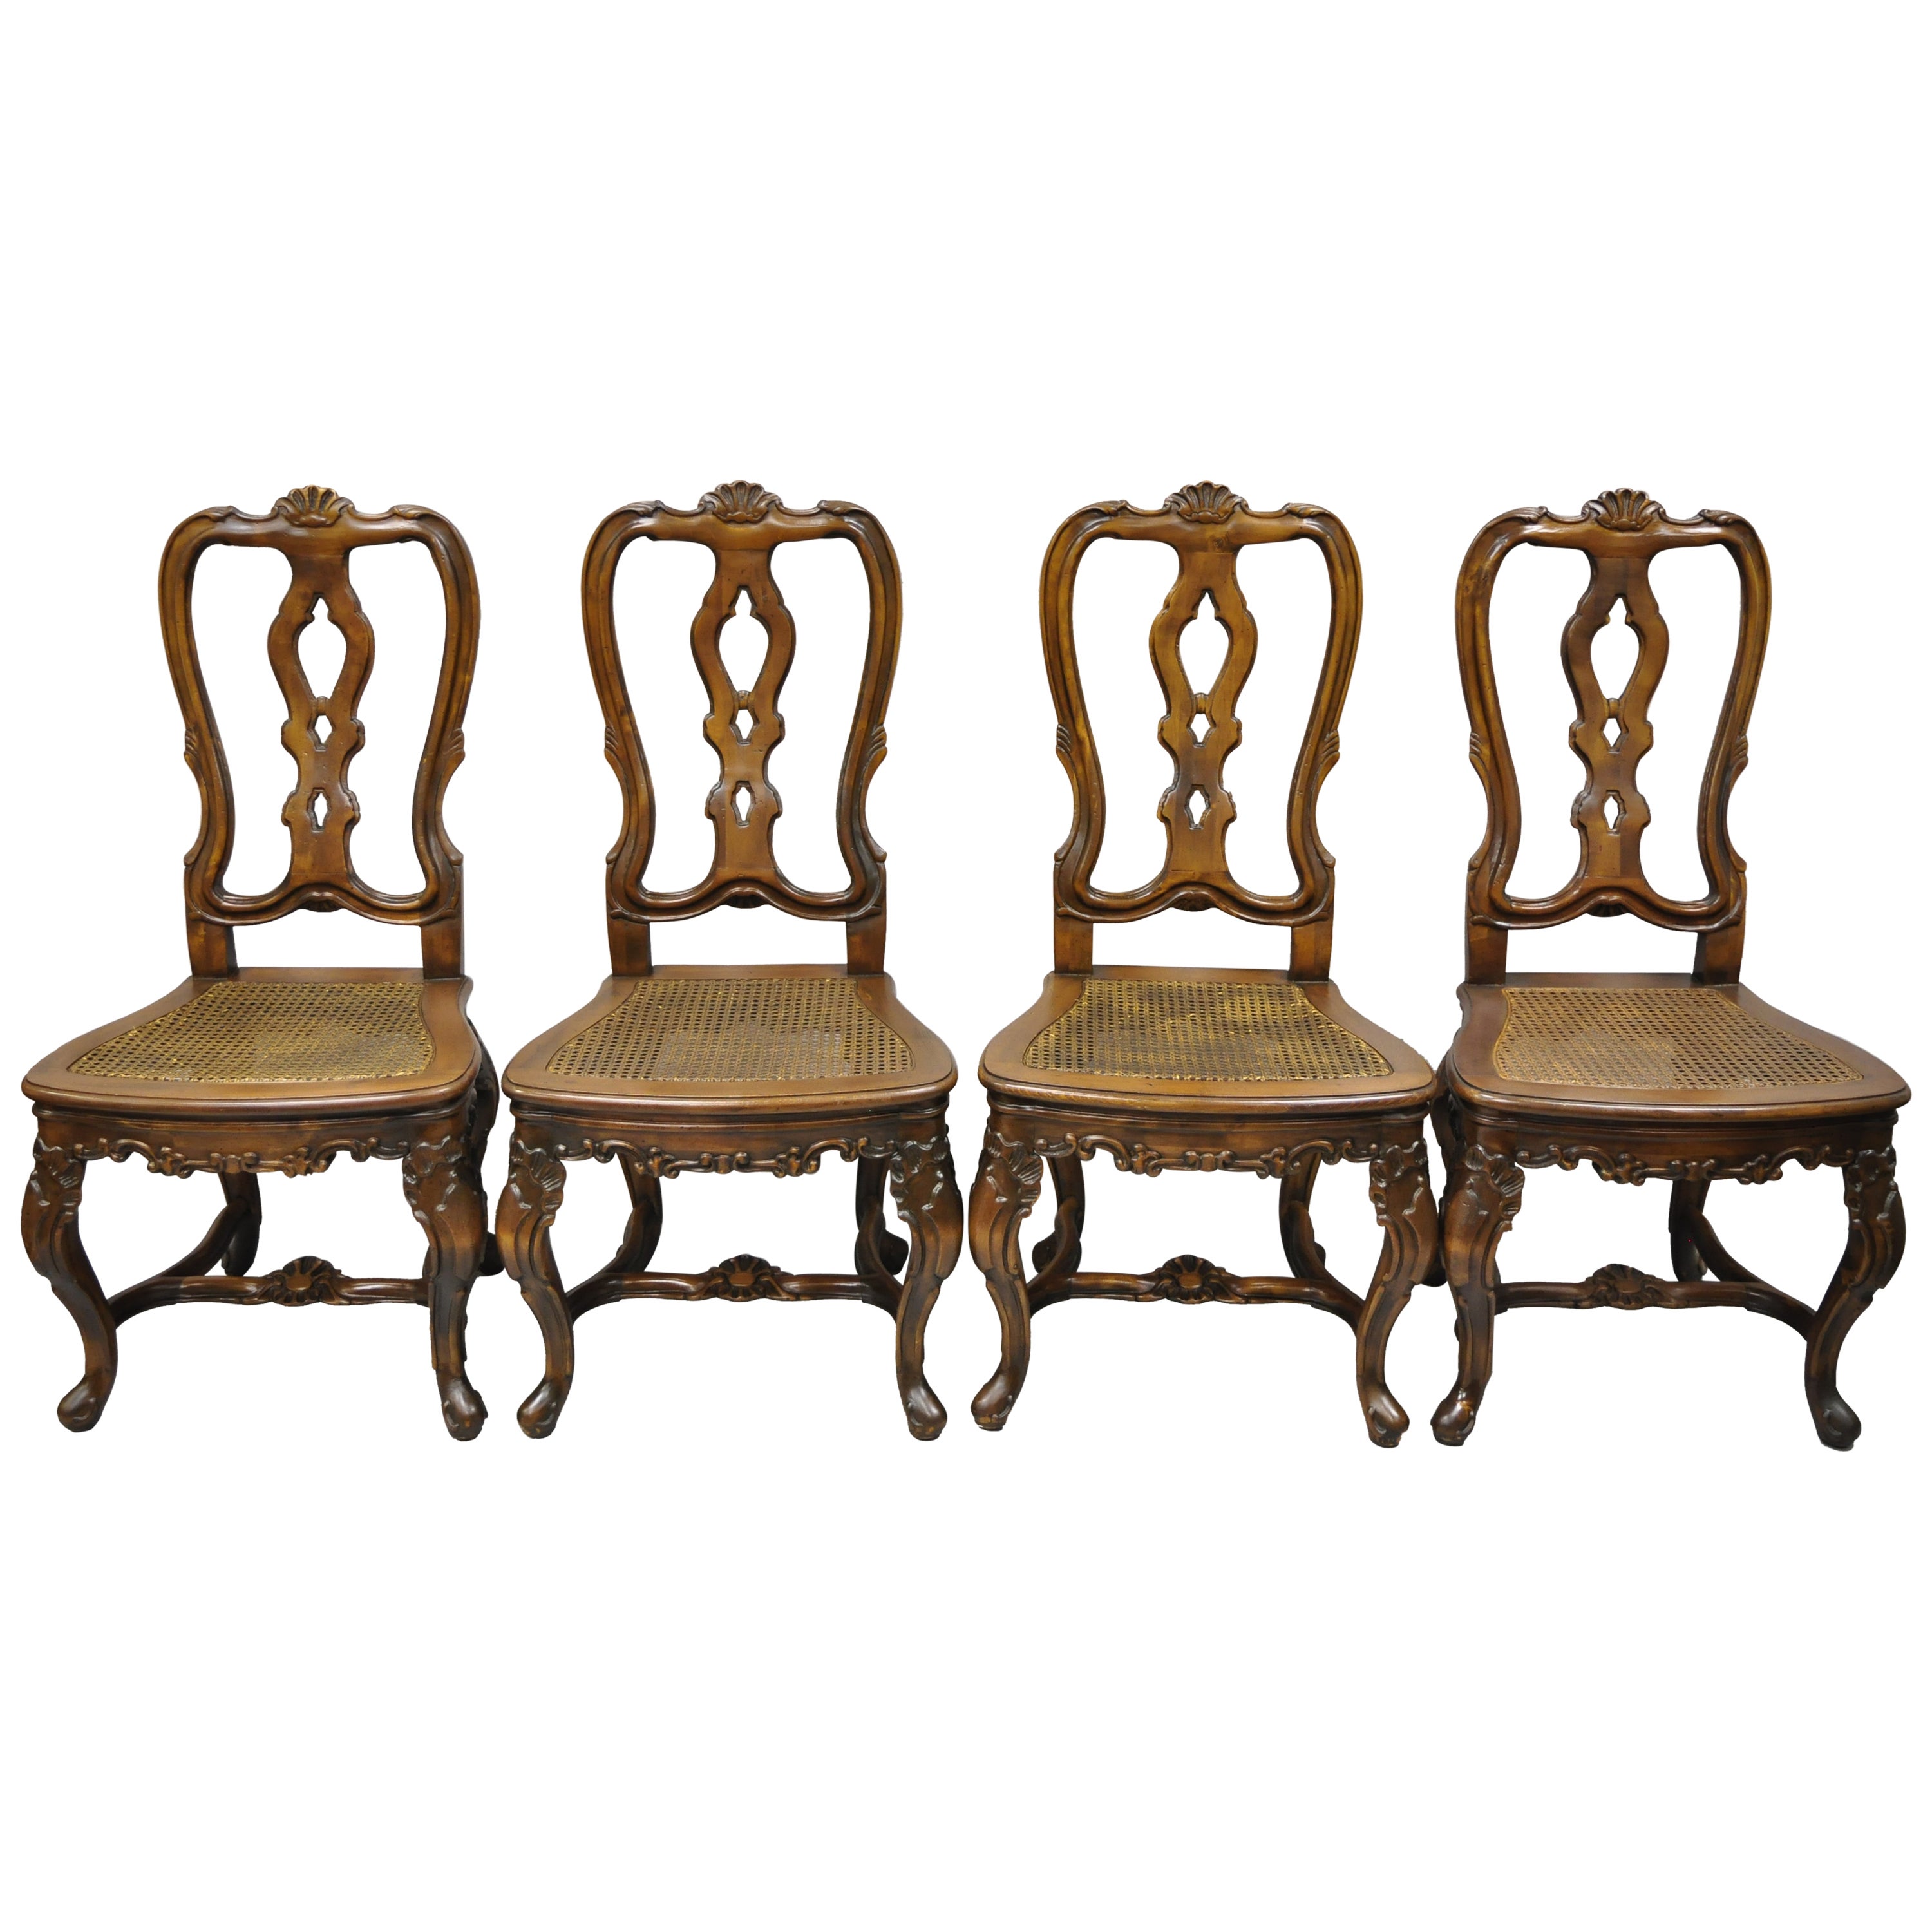 Spanish Rococo Baroque Style Solid Pine Wood Cane Seat Dining Chairs, Set of 4